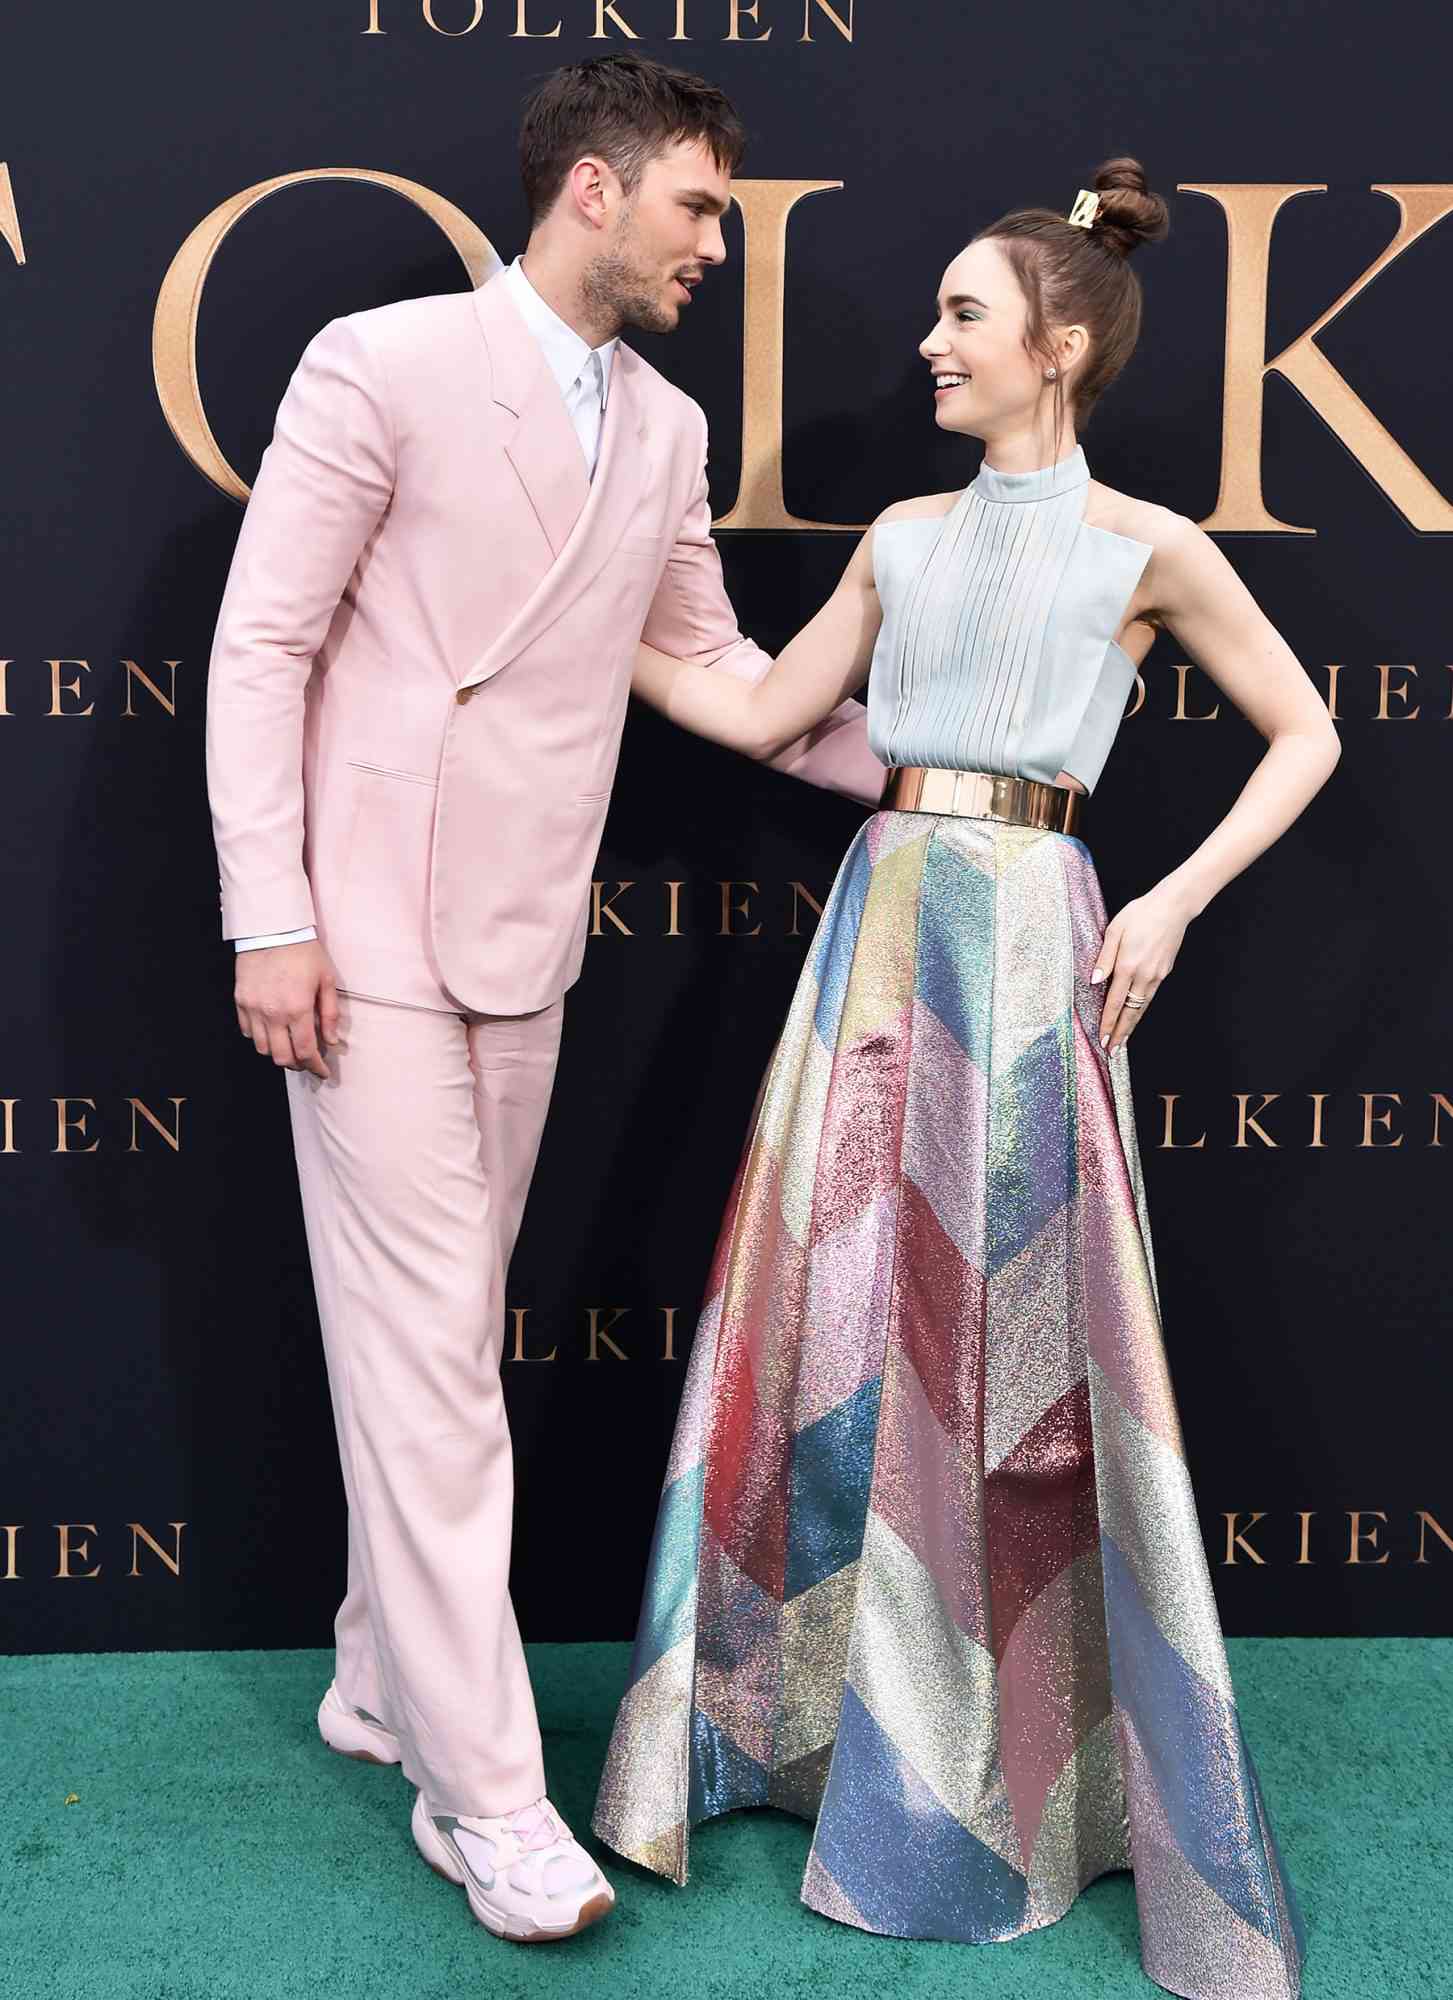 Nicholas Hoult and Lily Collins